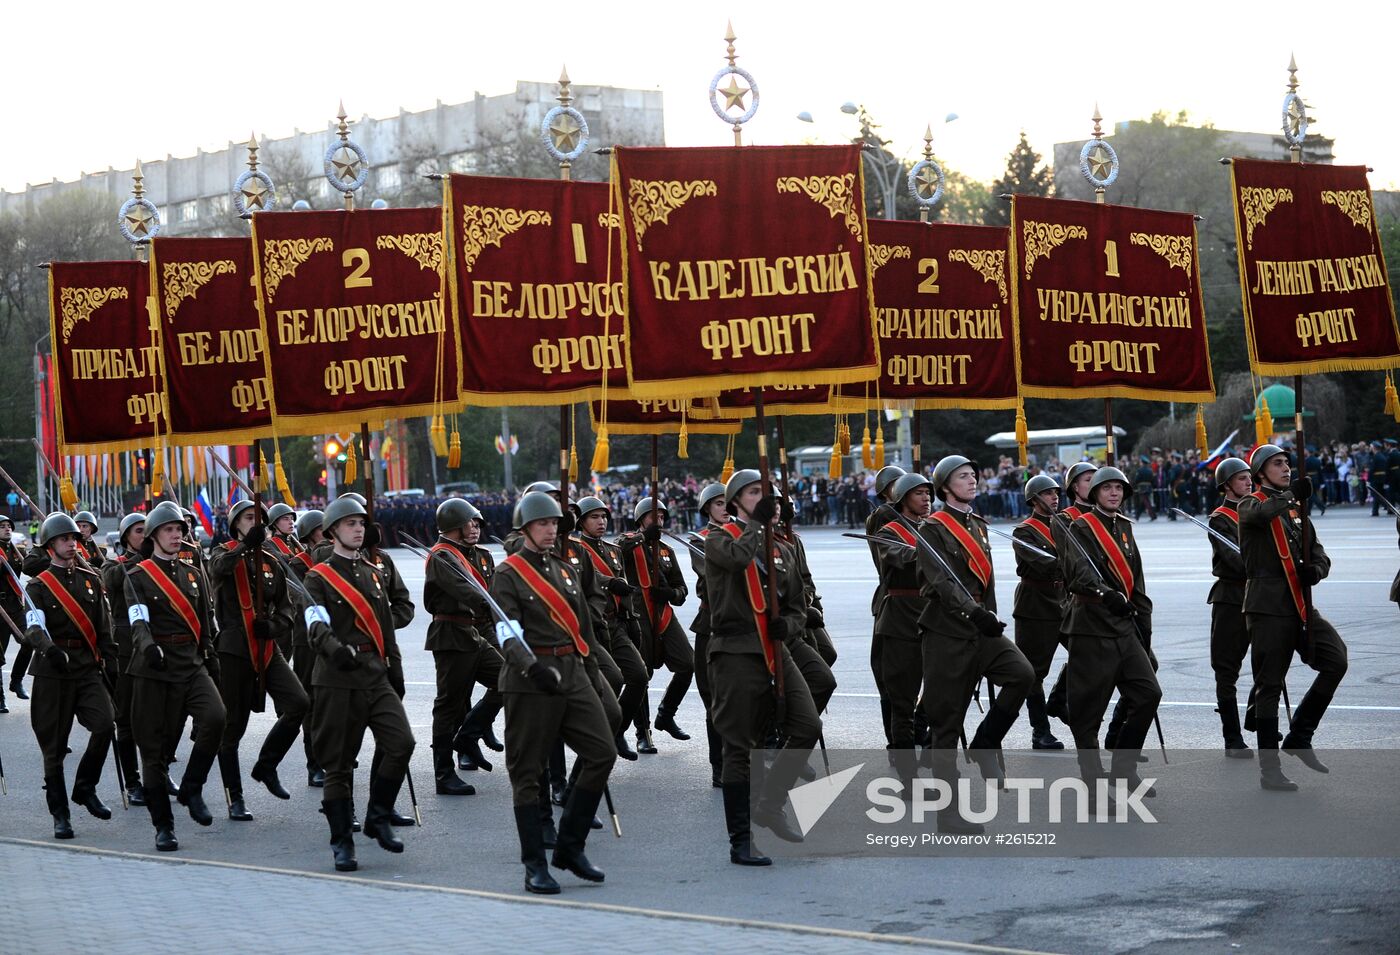 Victory Parade rehearsal in Rostov-on-Don